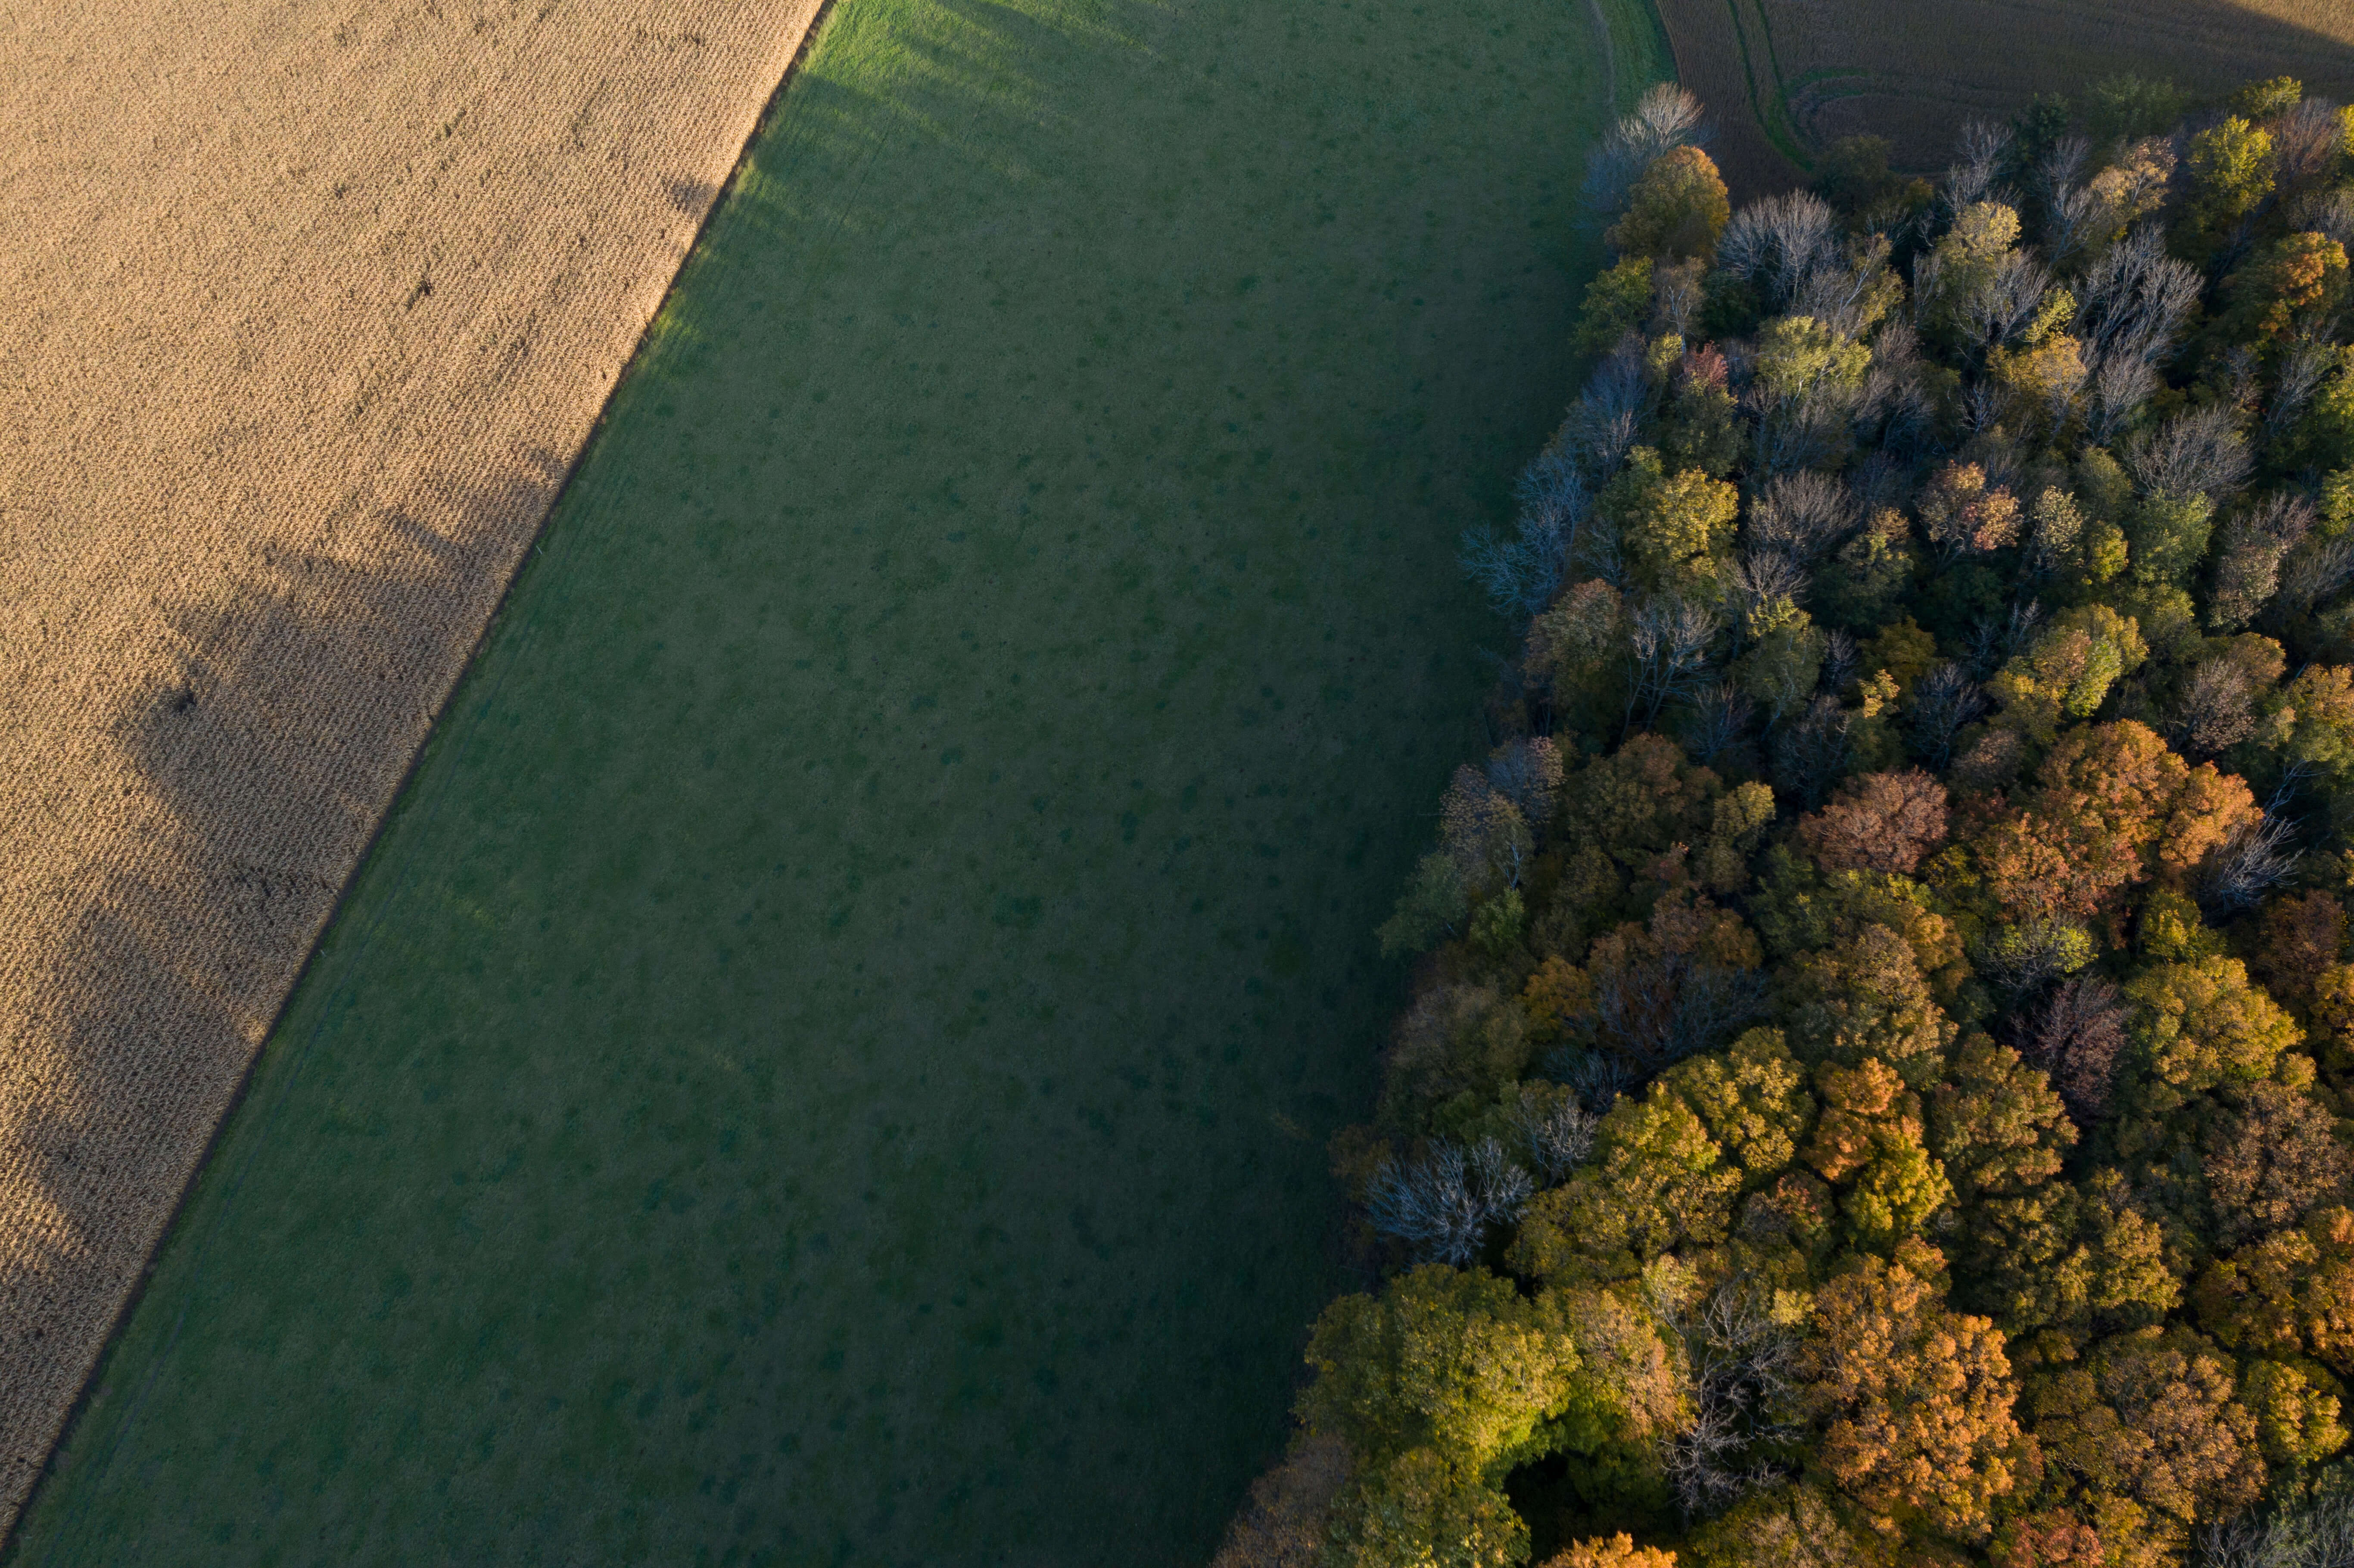 An Aerial View Of A Hay Field